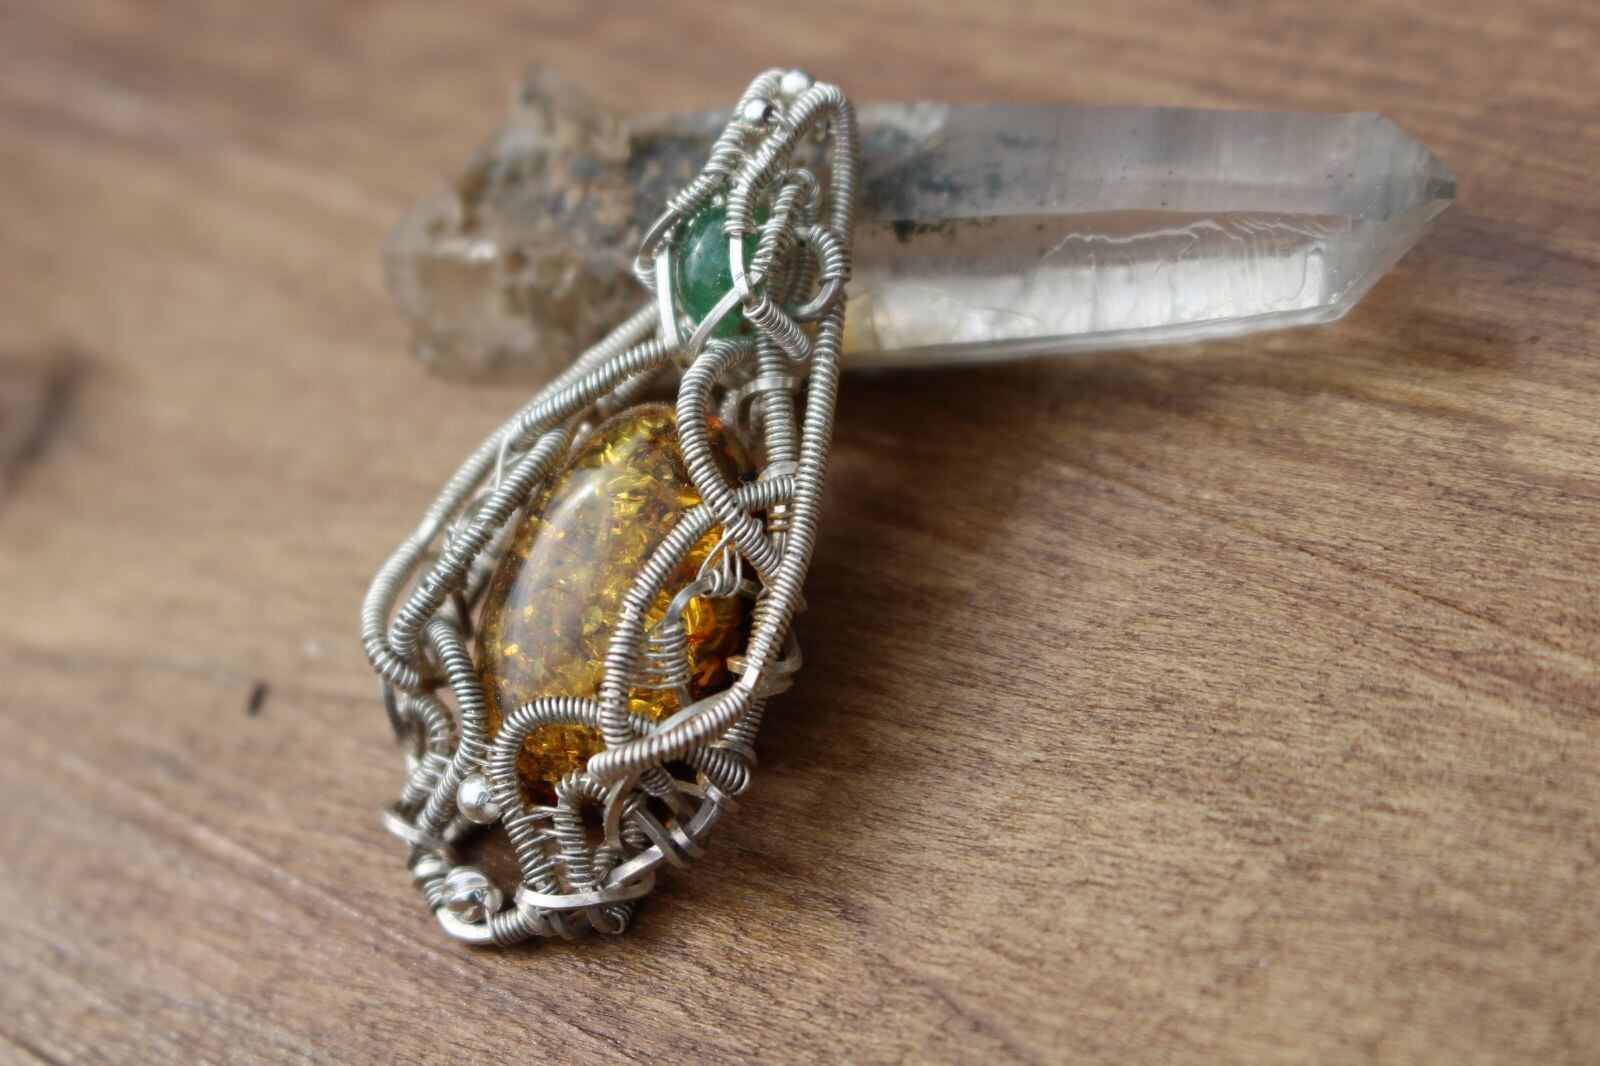 Amber & Emerald silver925 wirerapping pendant